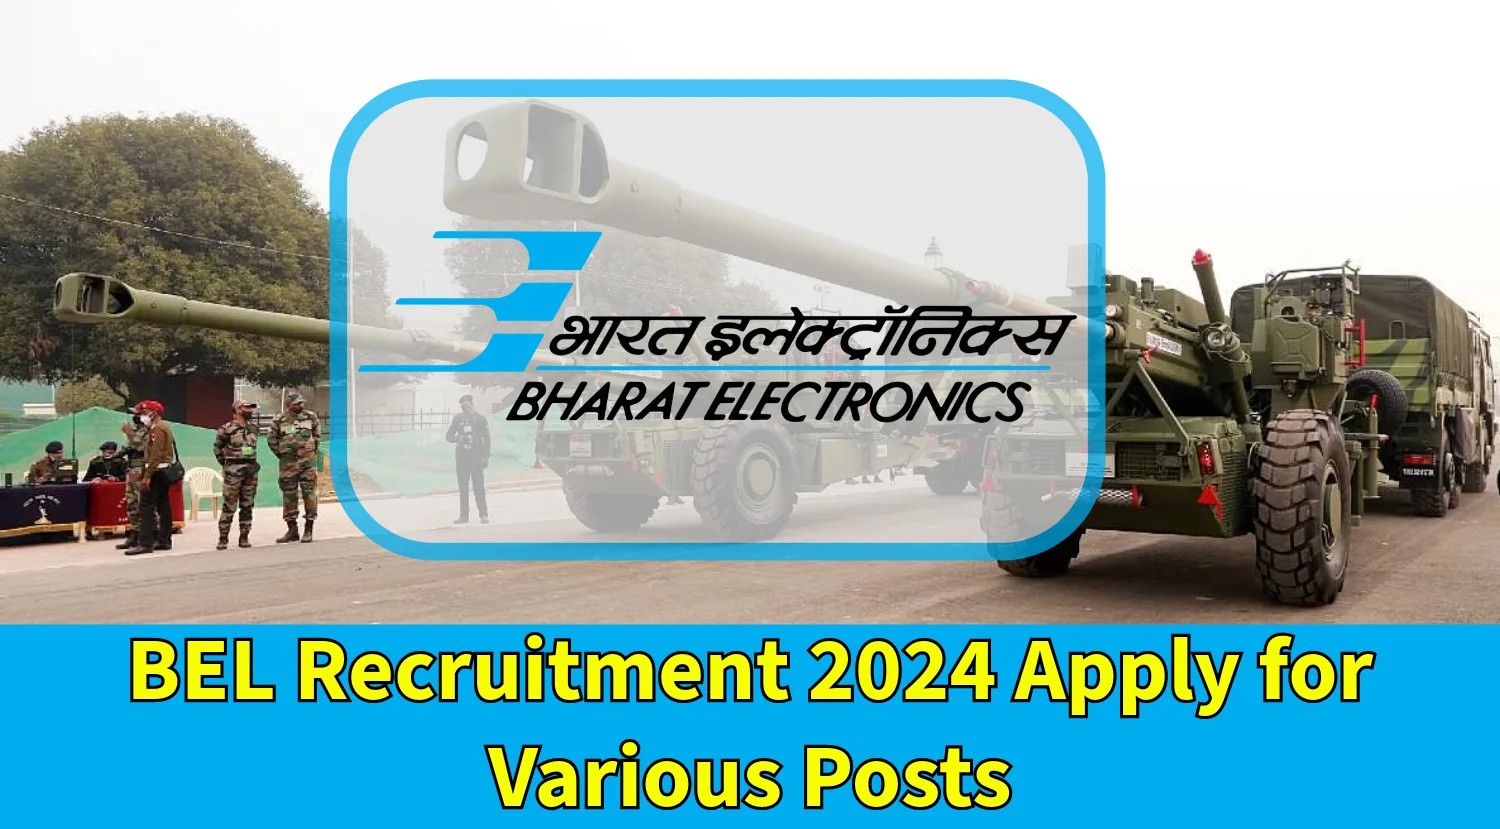 BEL Recruitment 2024 Apply for Various Posts